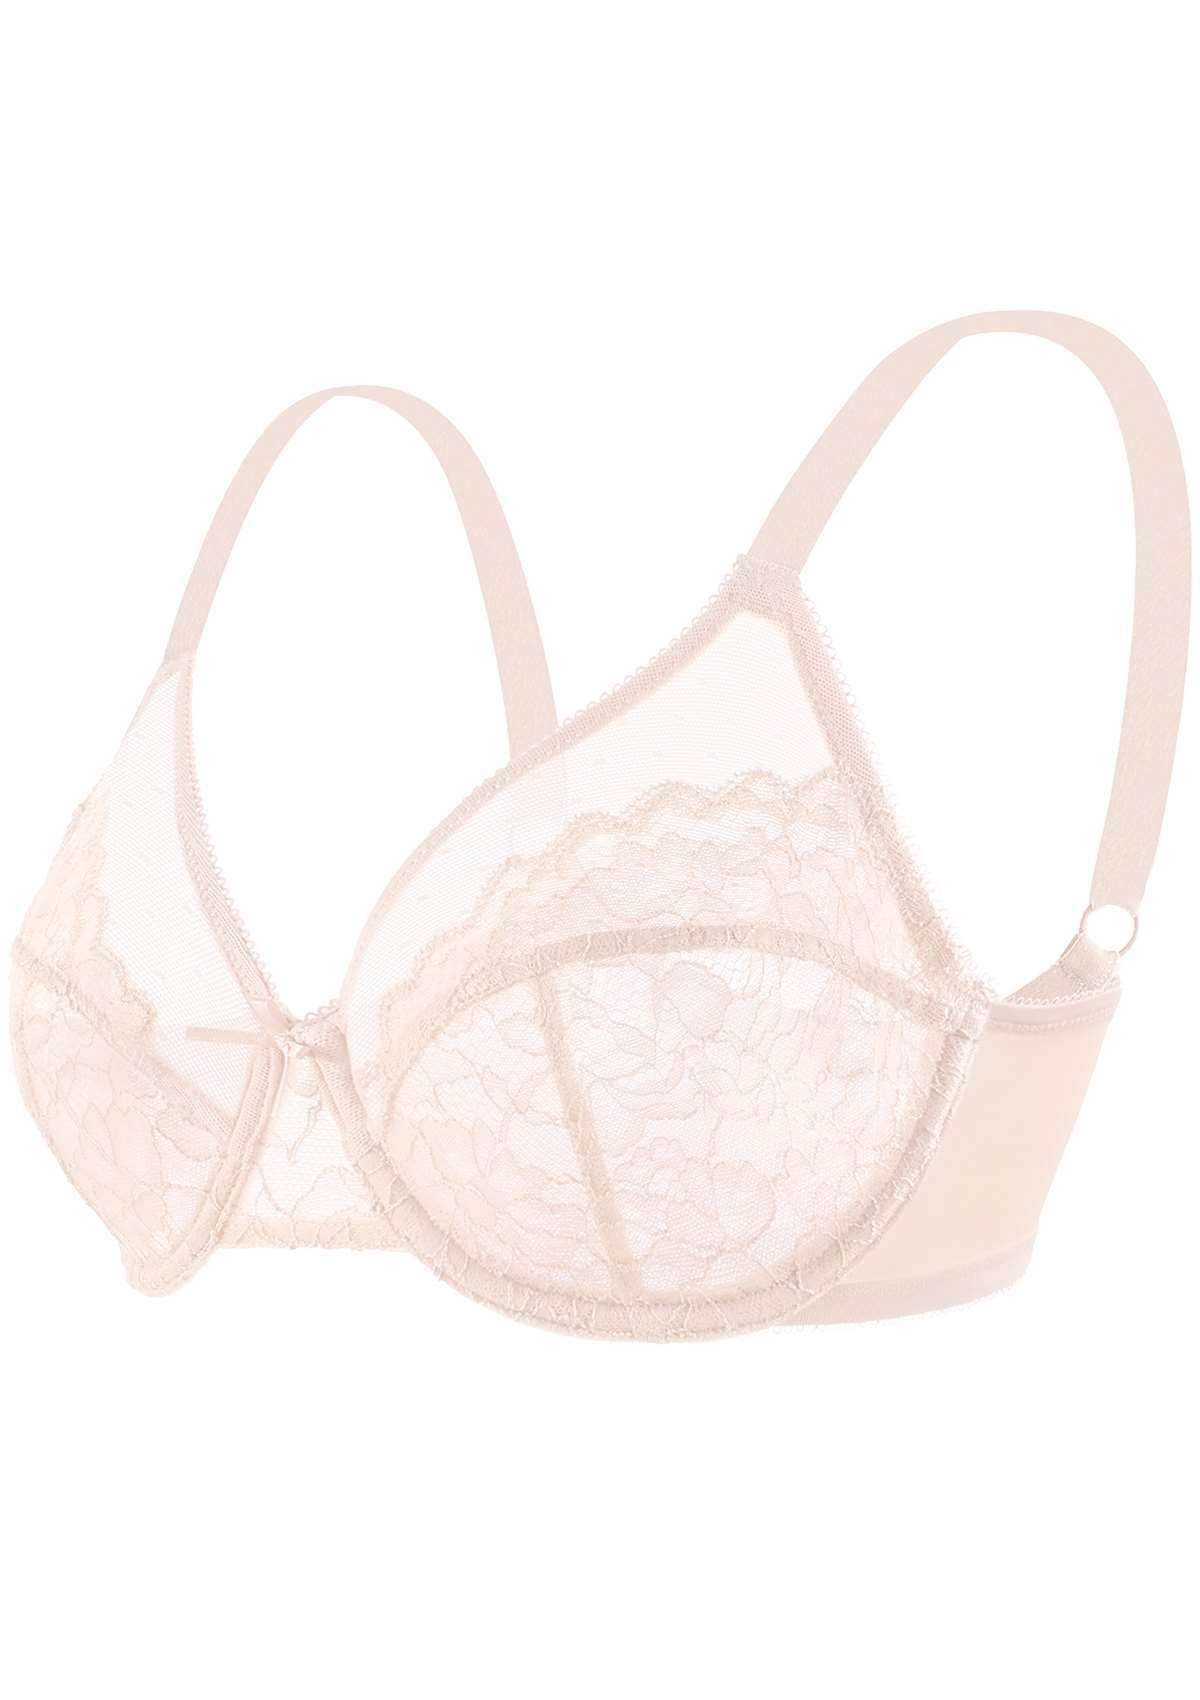 HSIA Enchante Lacy Bra: Comfy Sheer Lace Bra With Lift - Dusty Peach / 40 / D